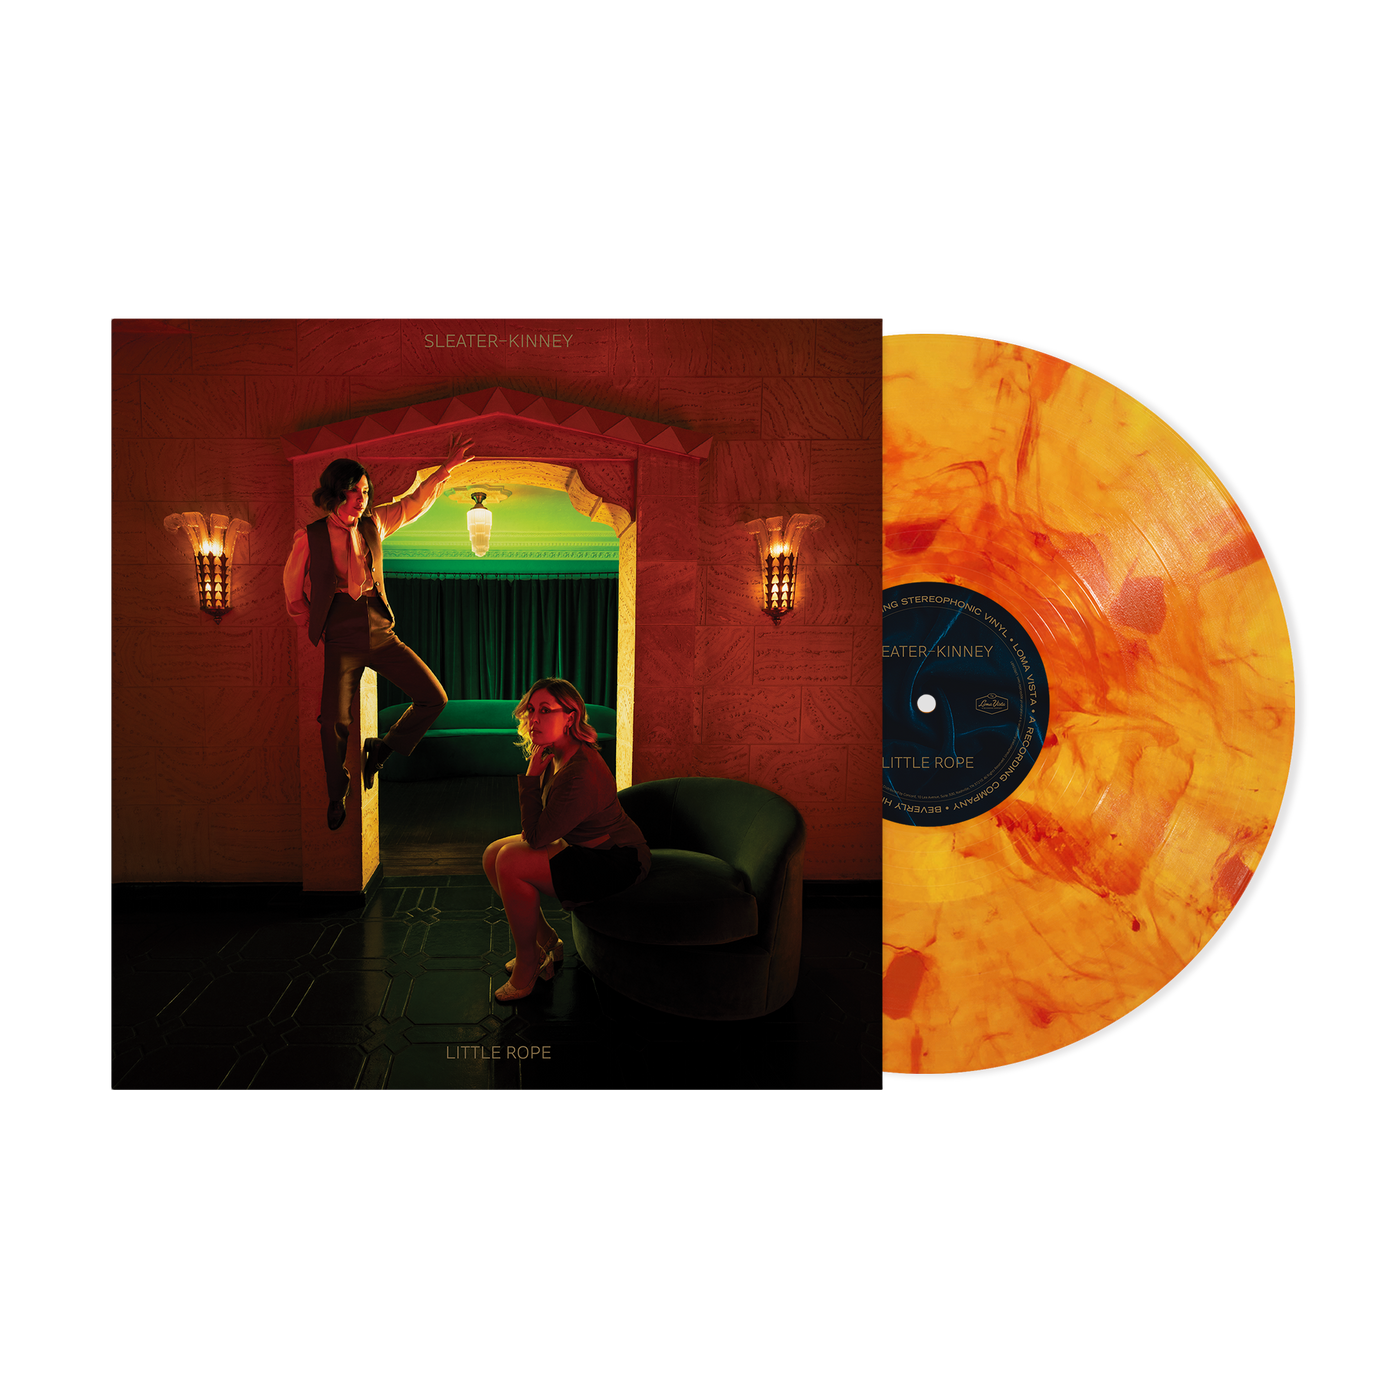 Little Rope Limited Edition Orange / Red "Hell" Colored Vinyl